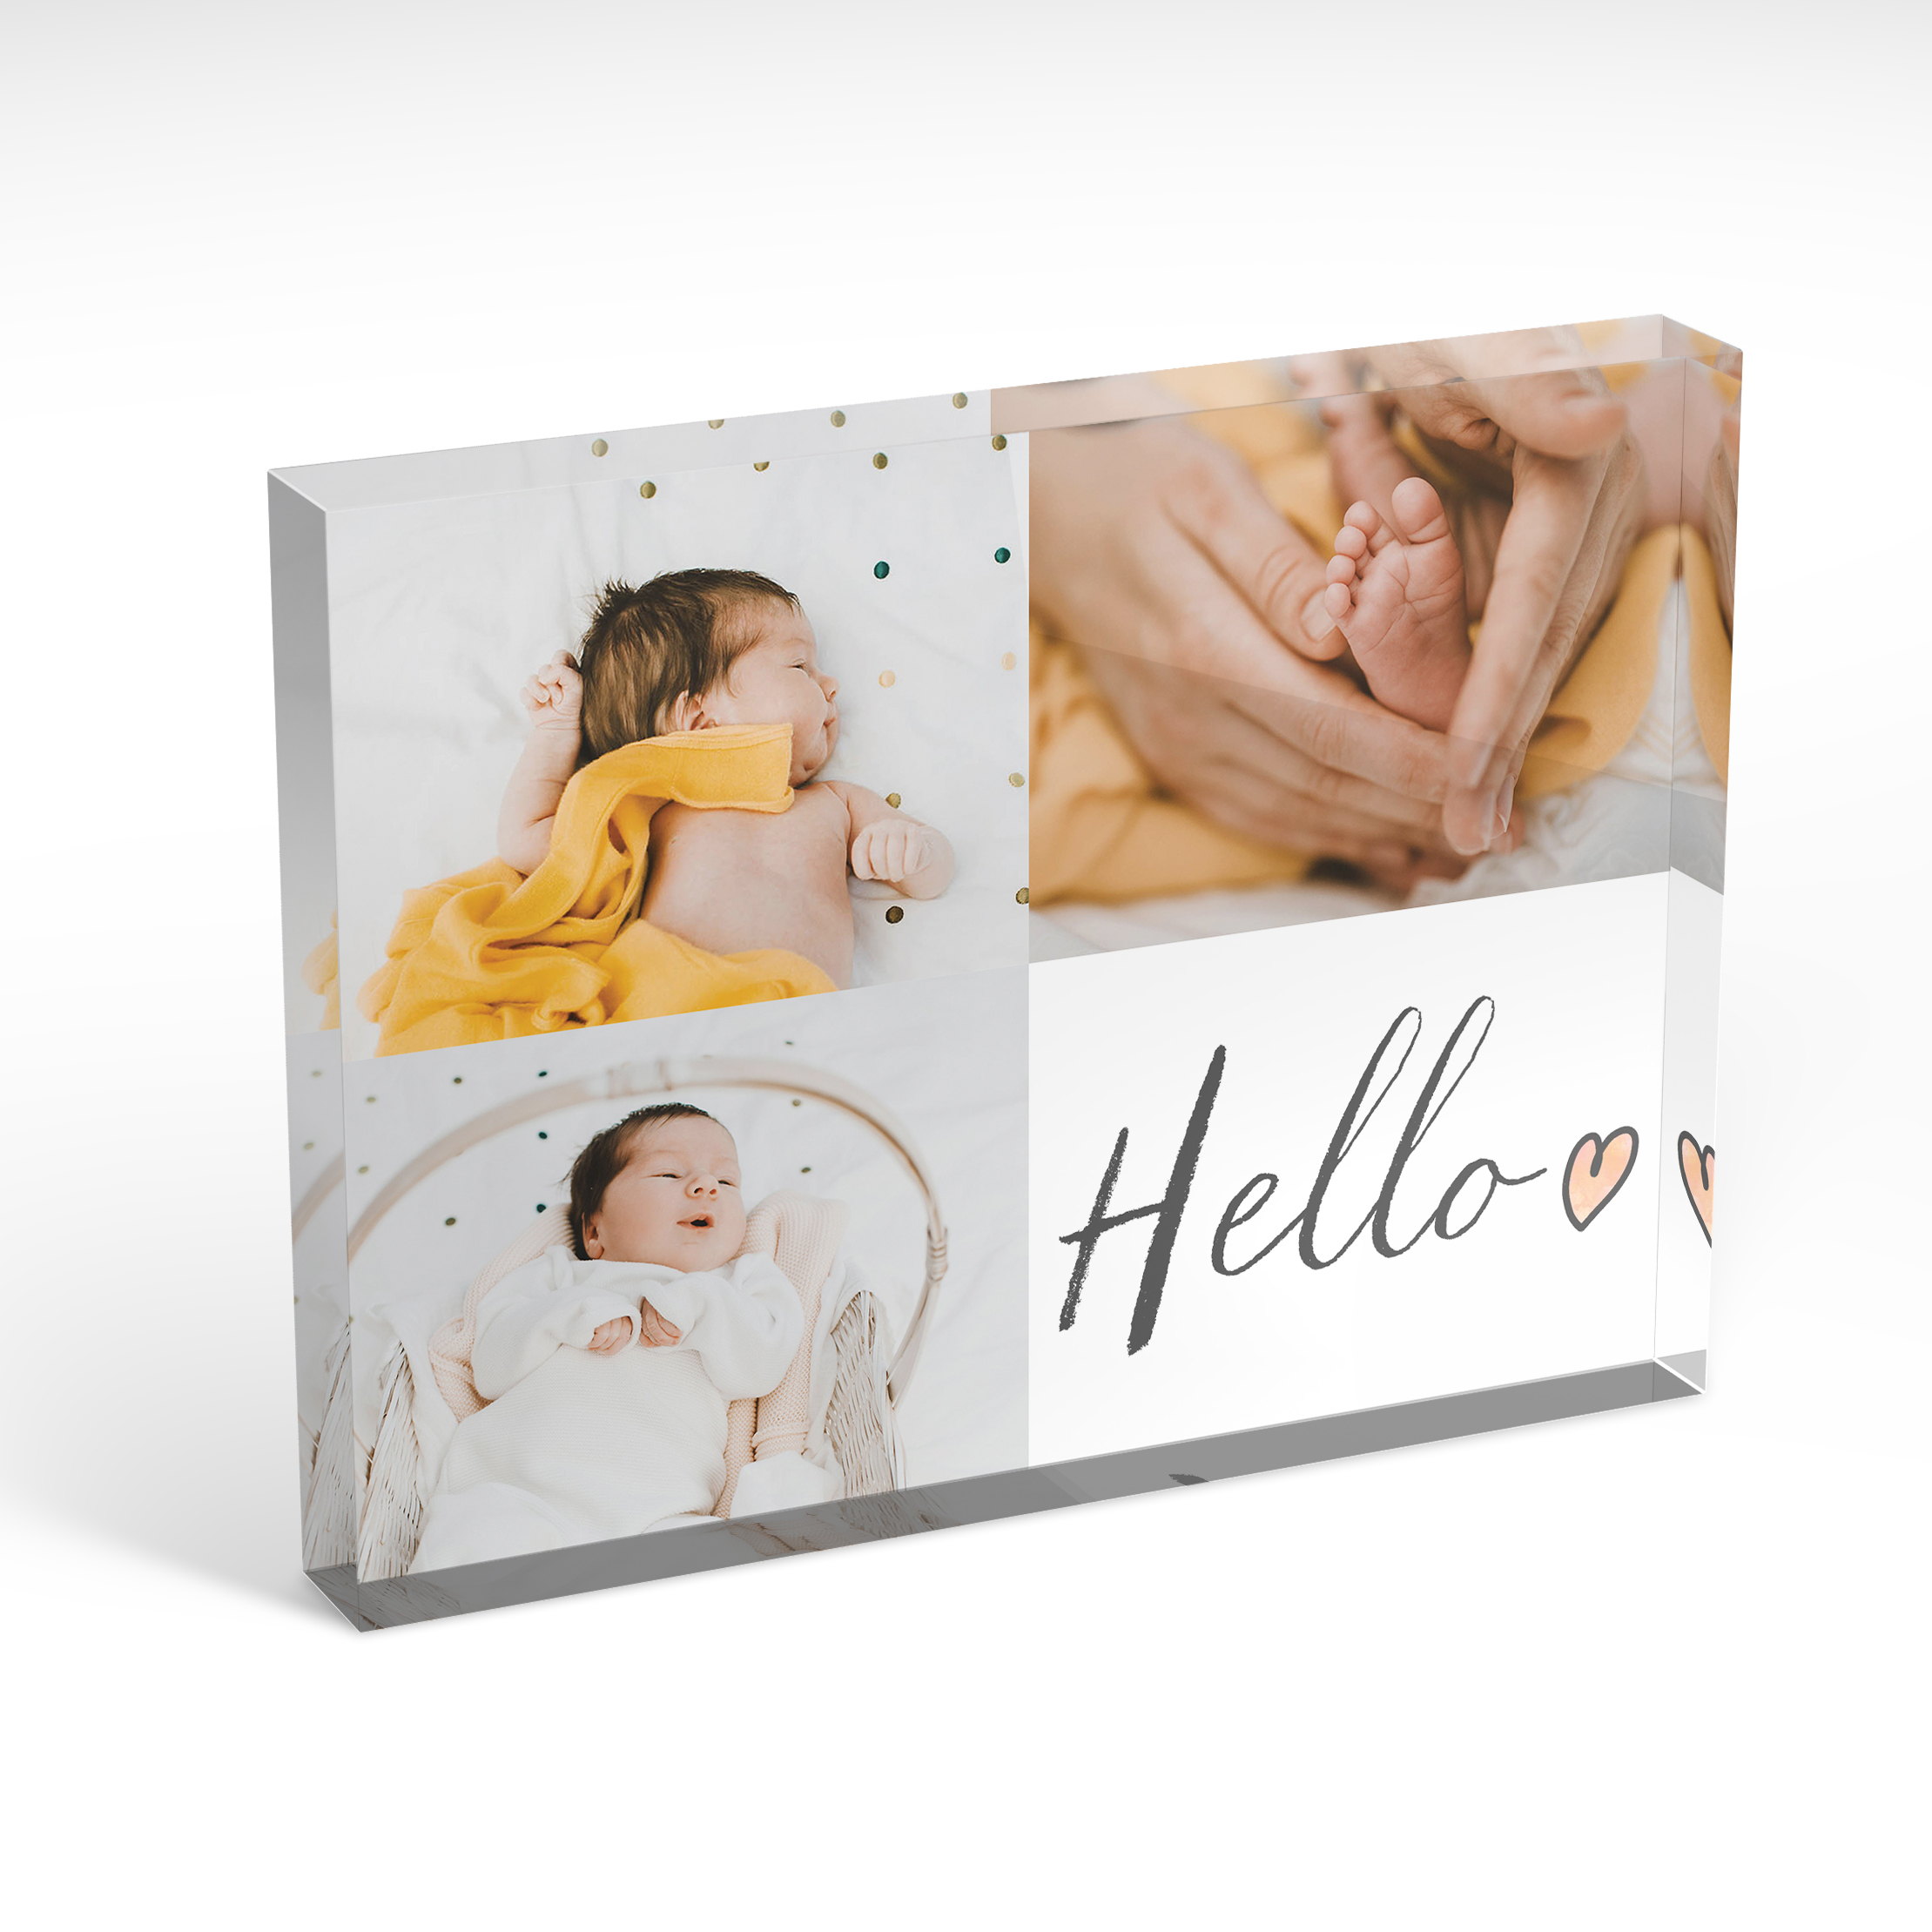 An angled side view of a landscape layout Online acrylic photo blocks with space for 3 photos. Thiis design is named "Triple Play Hello". 